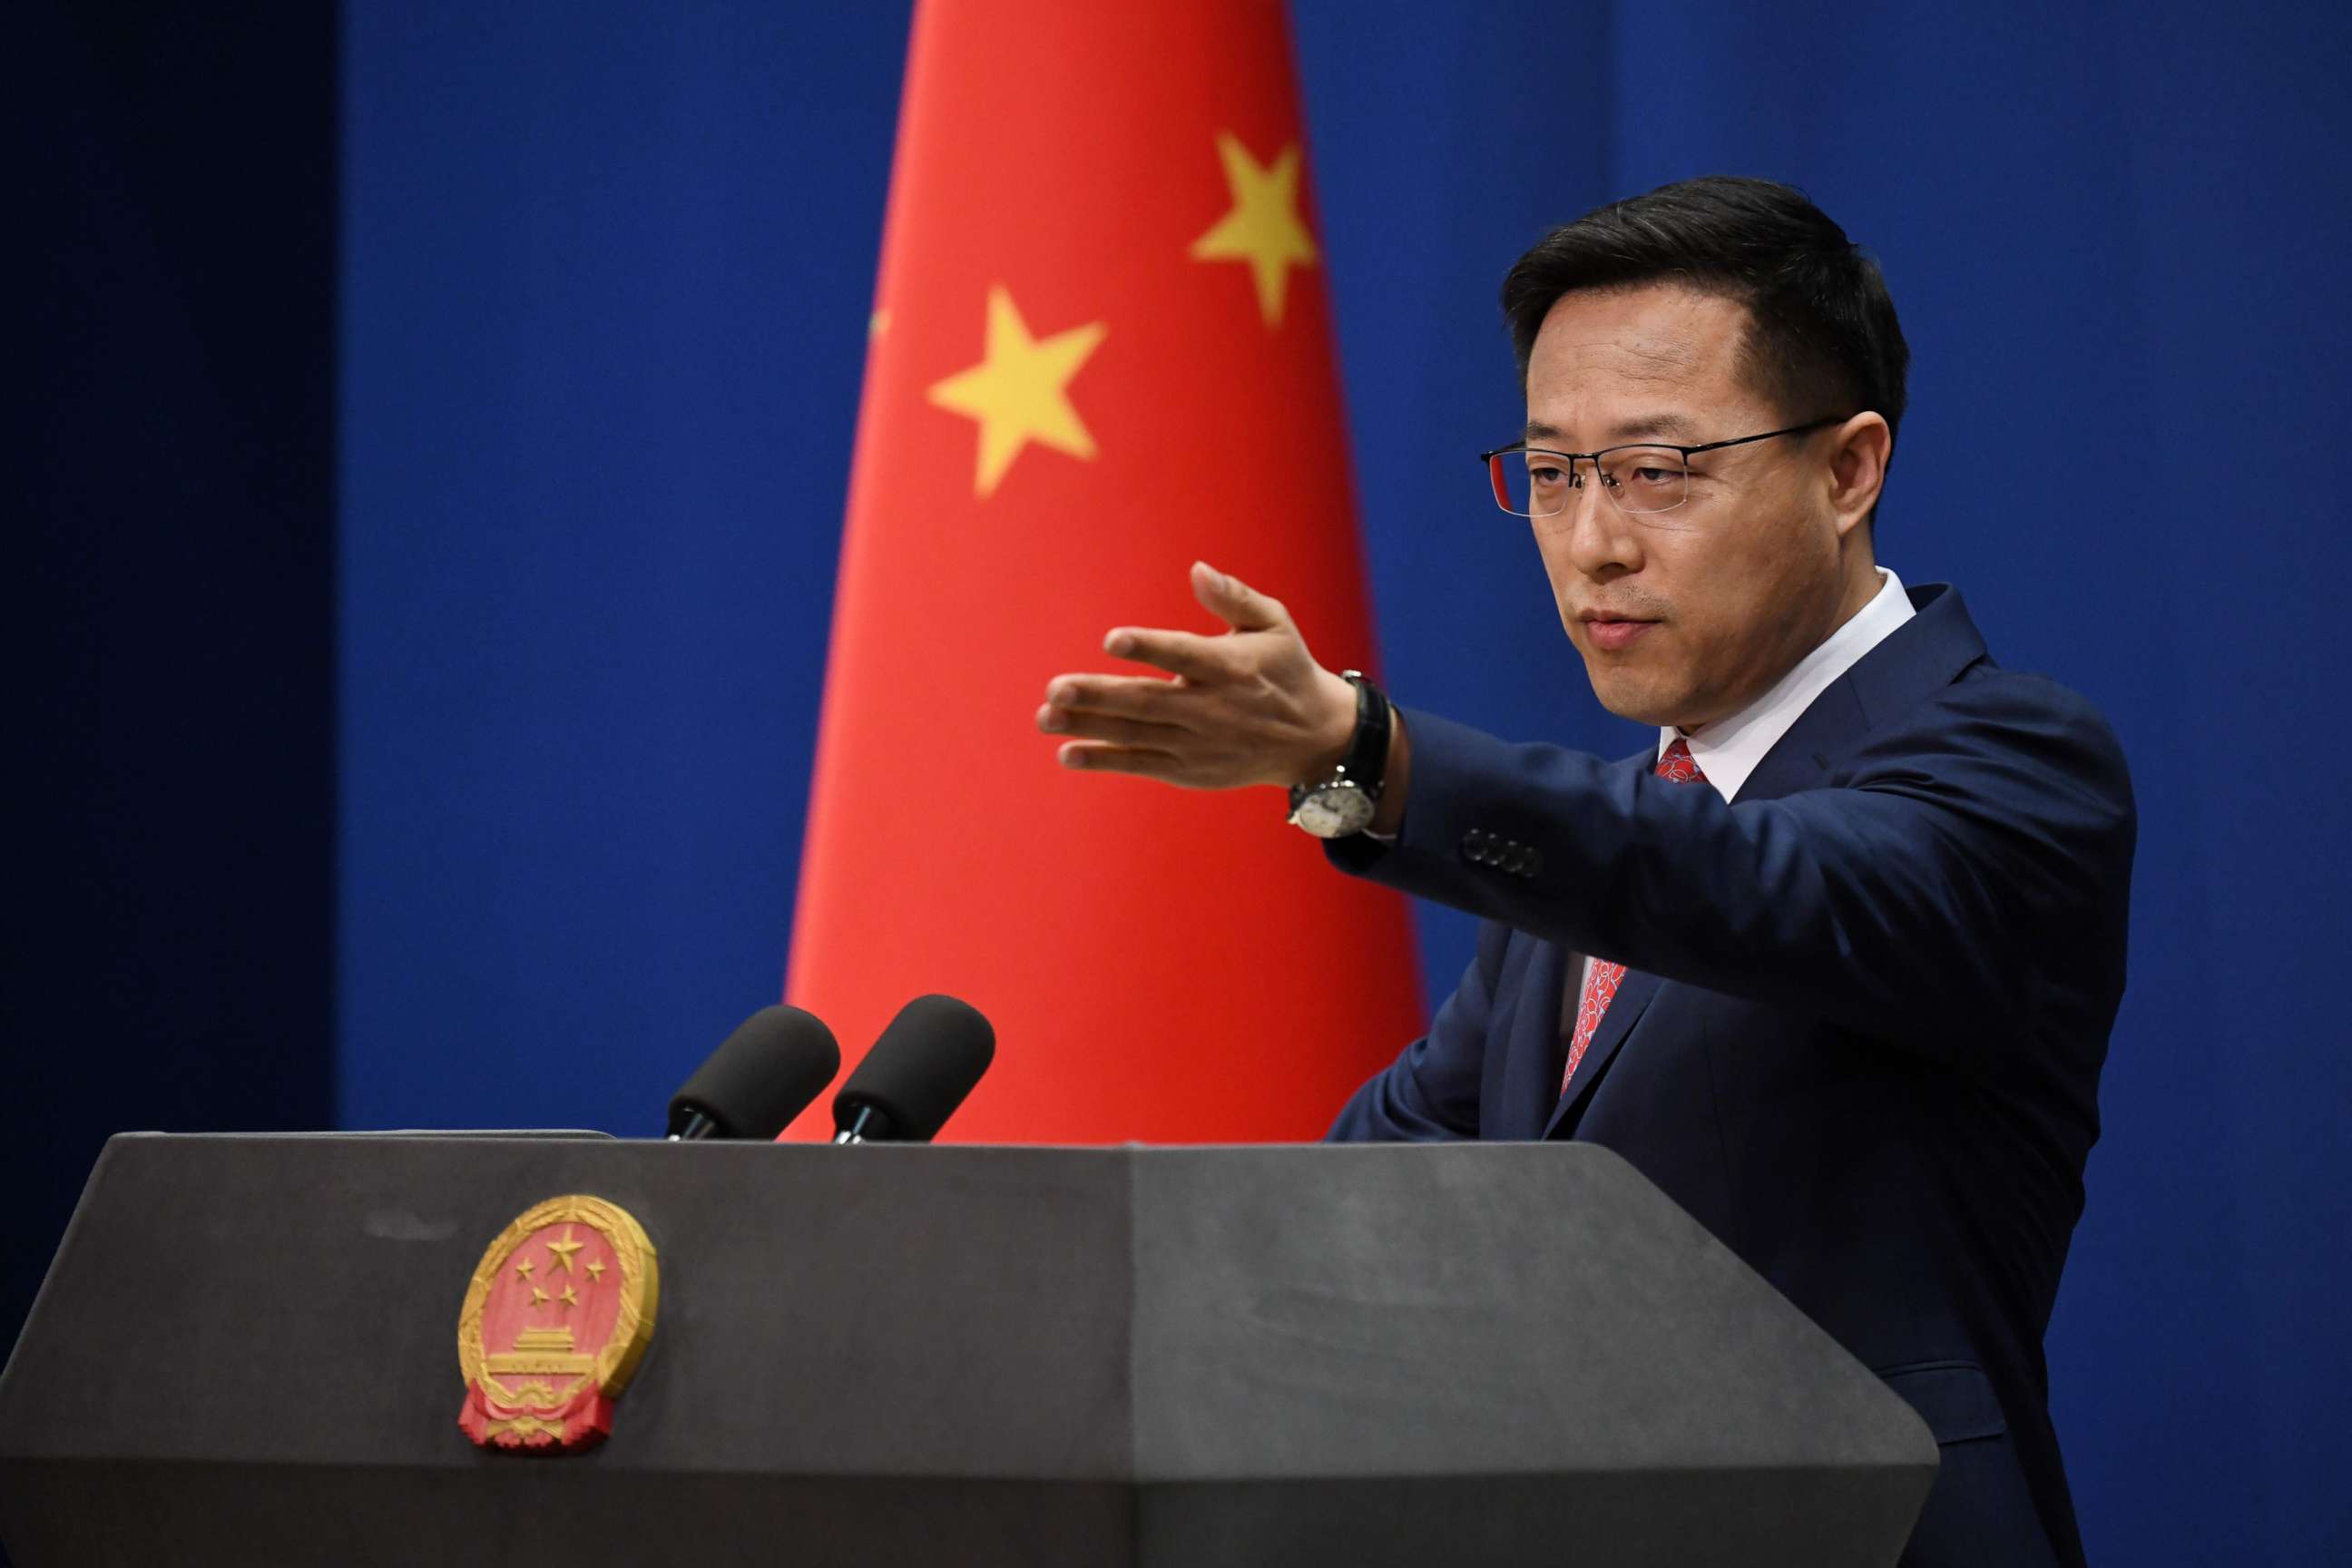 PHOTO: Chinese Foreign Ministry spokesman Zhao Lijian takes a question at the daily media briefing in Beijing on April 8, 2020.